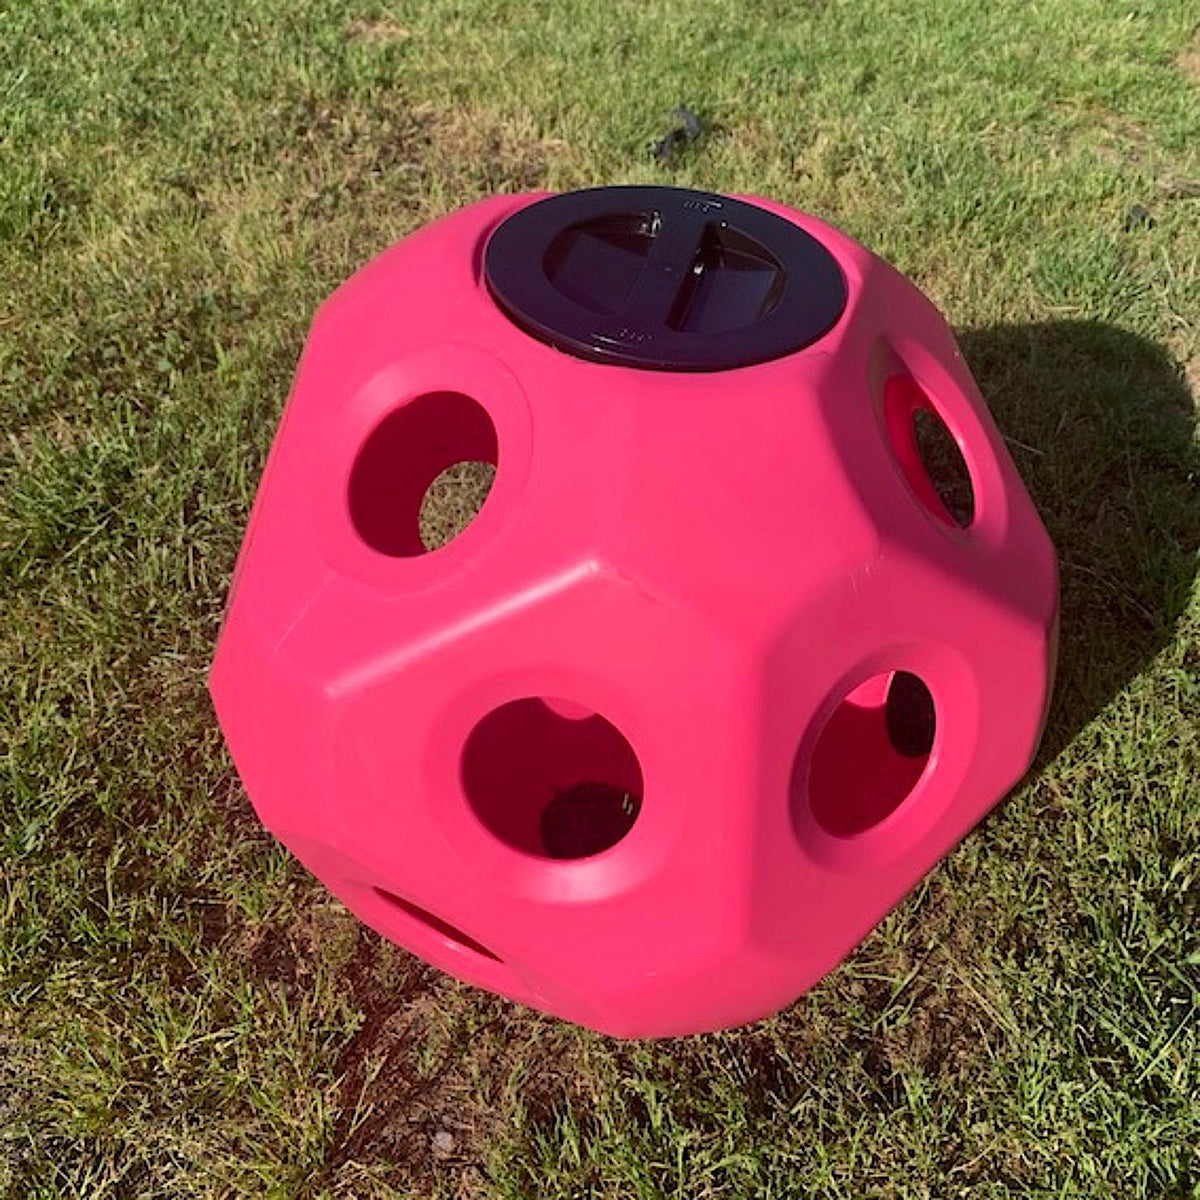 Pink plastic hay ball with flat sides and moderately sized holes throughout.